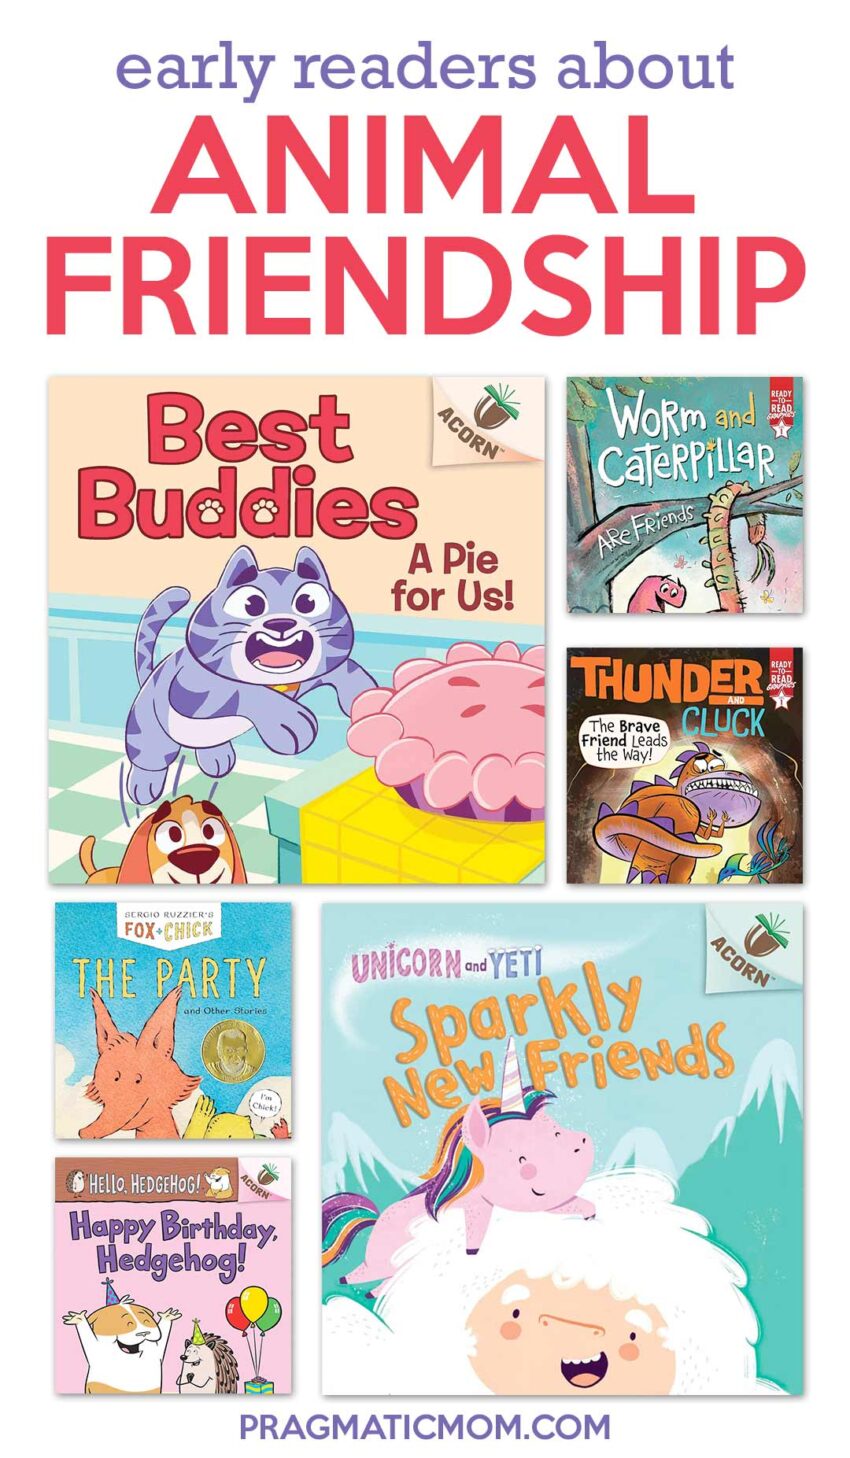 Early Readers About Animal Friendship